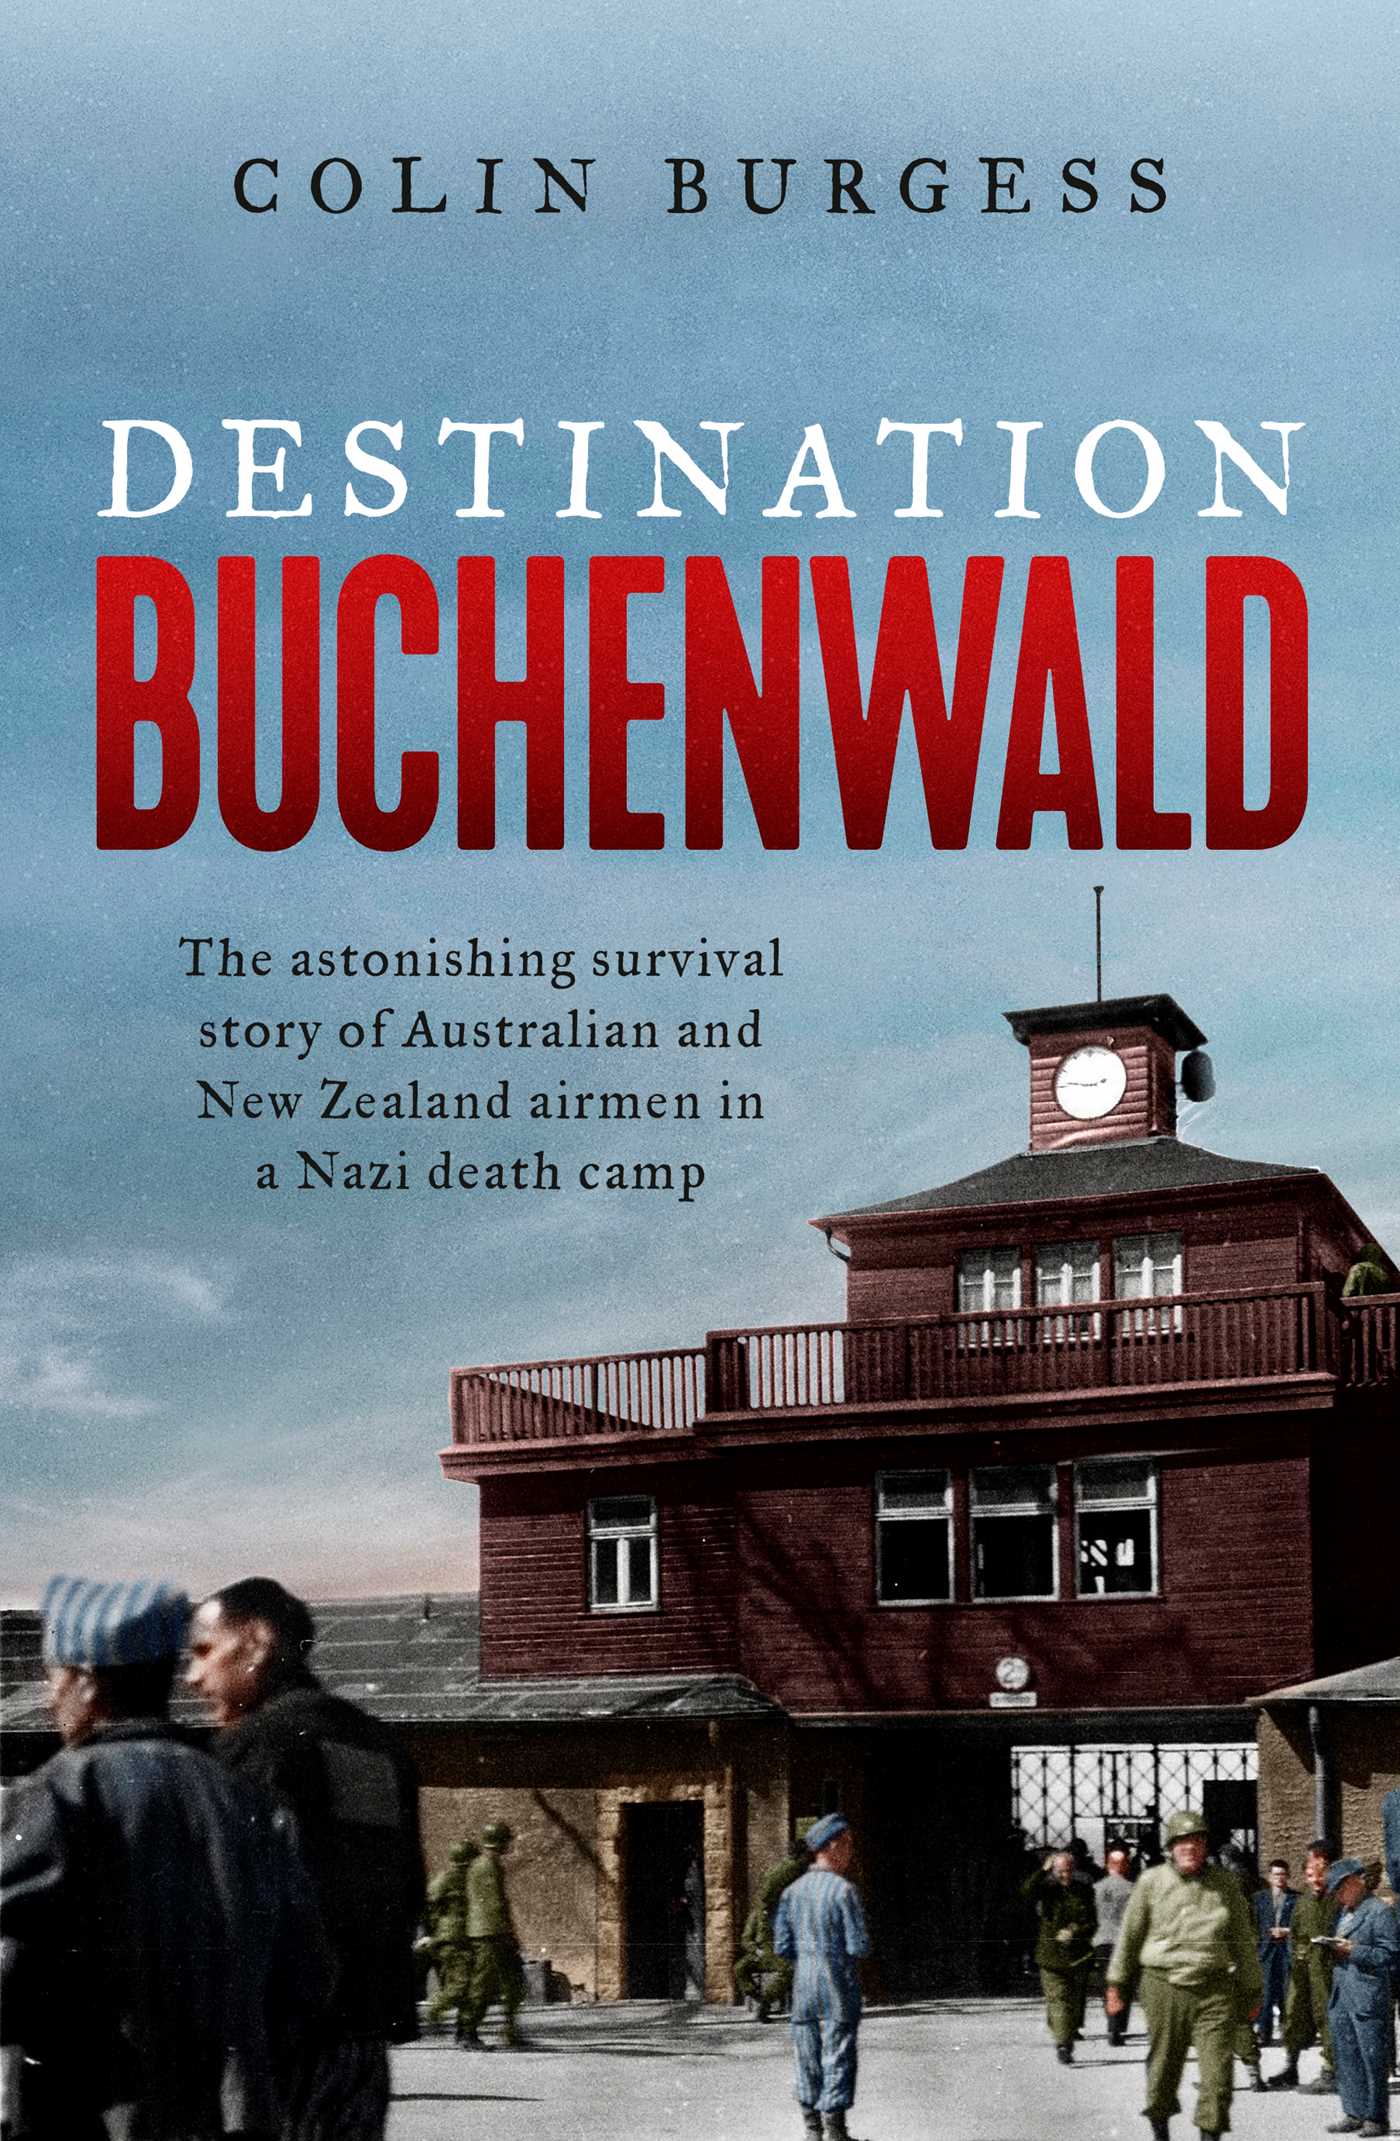 Destination Buchenwald: The Astonishing Survival Story of Australian and New Zealand Airmen in a Nazi Death Camp